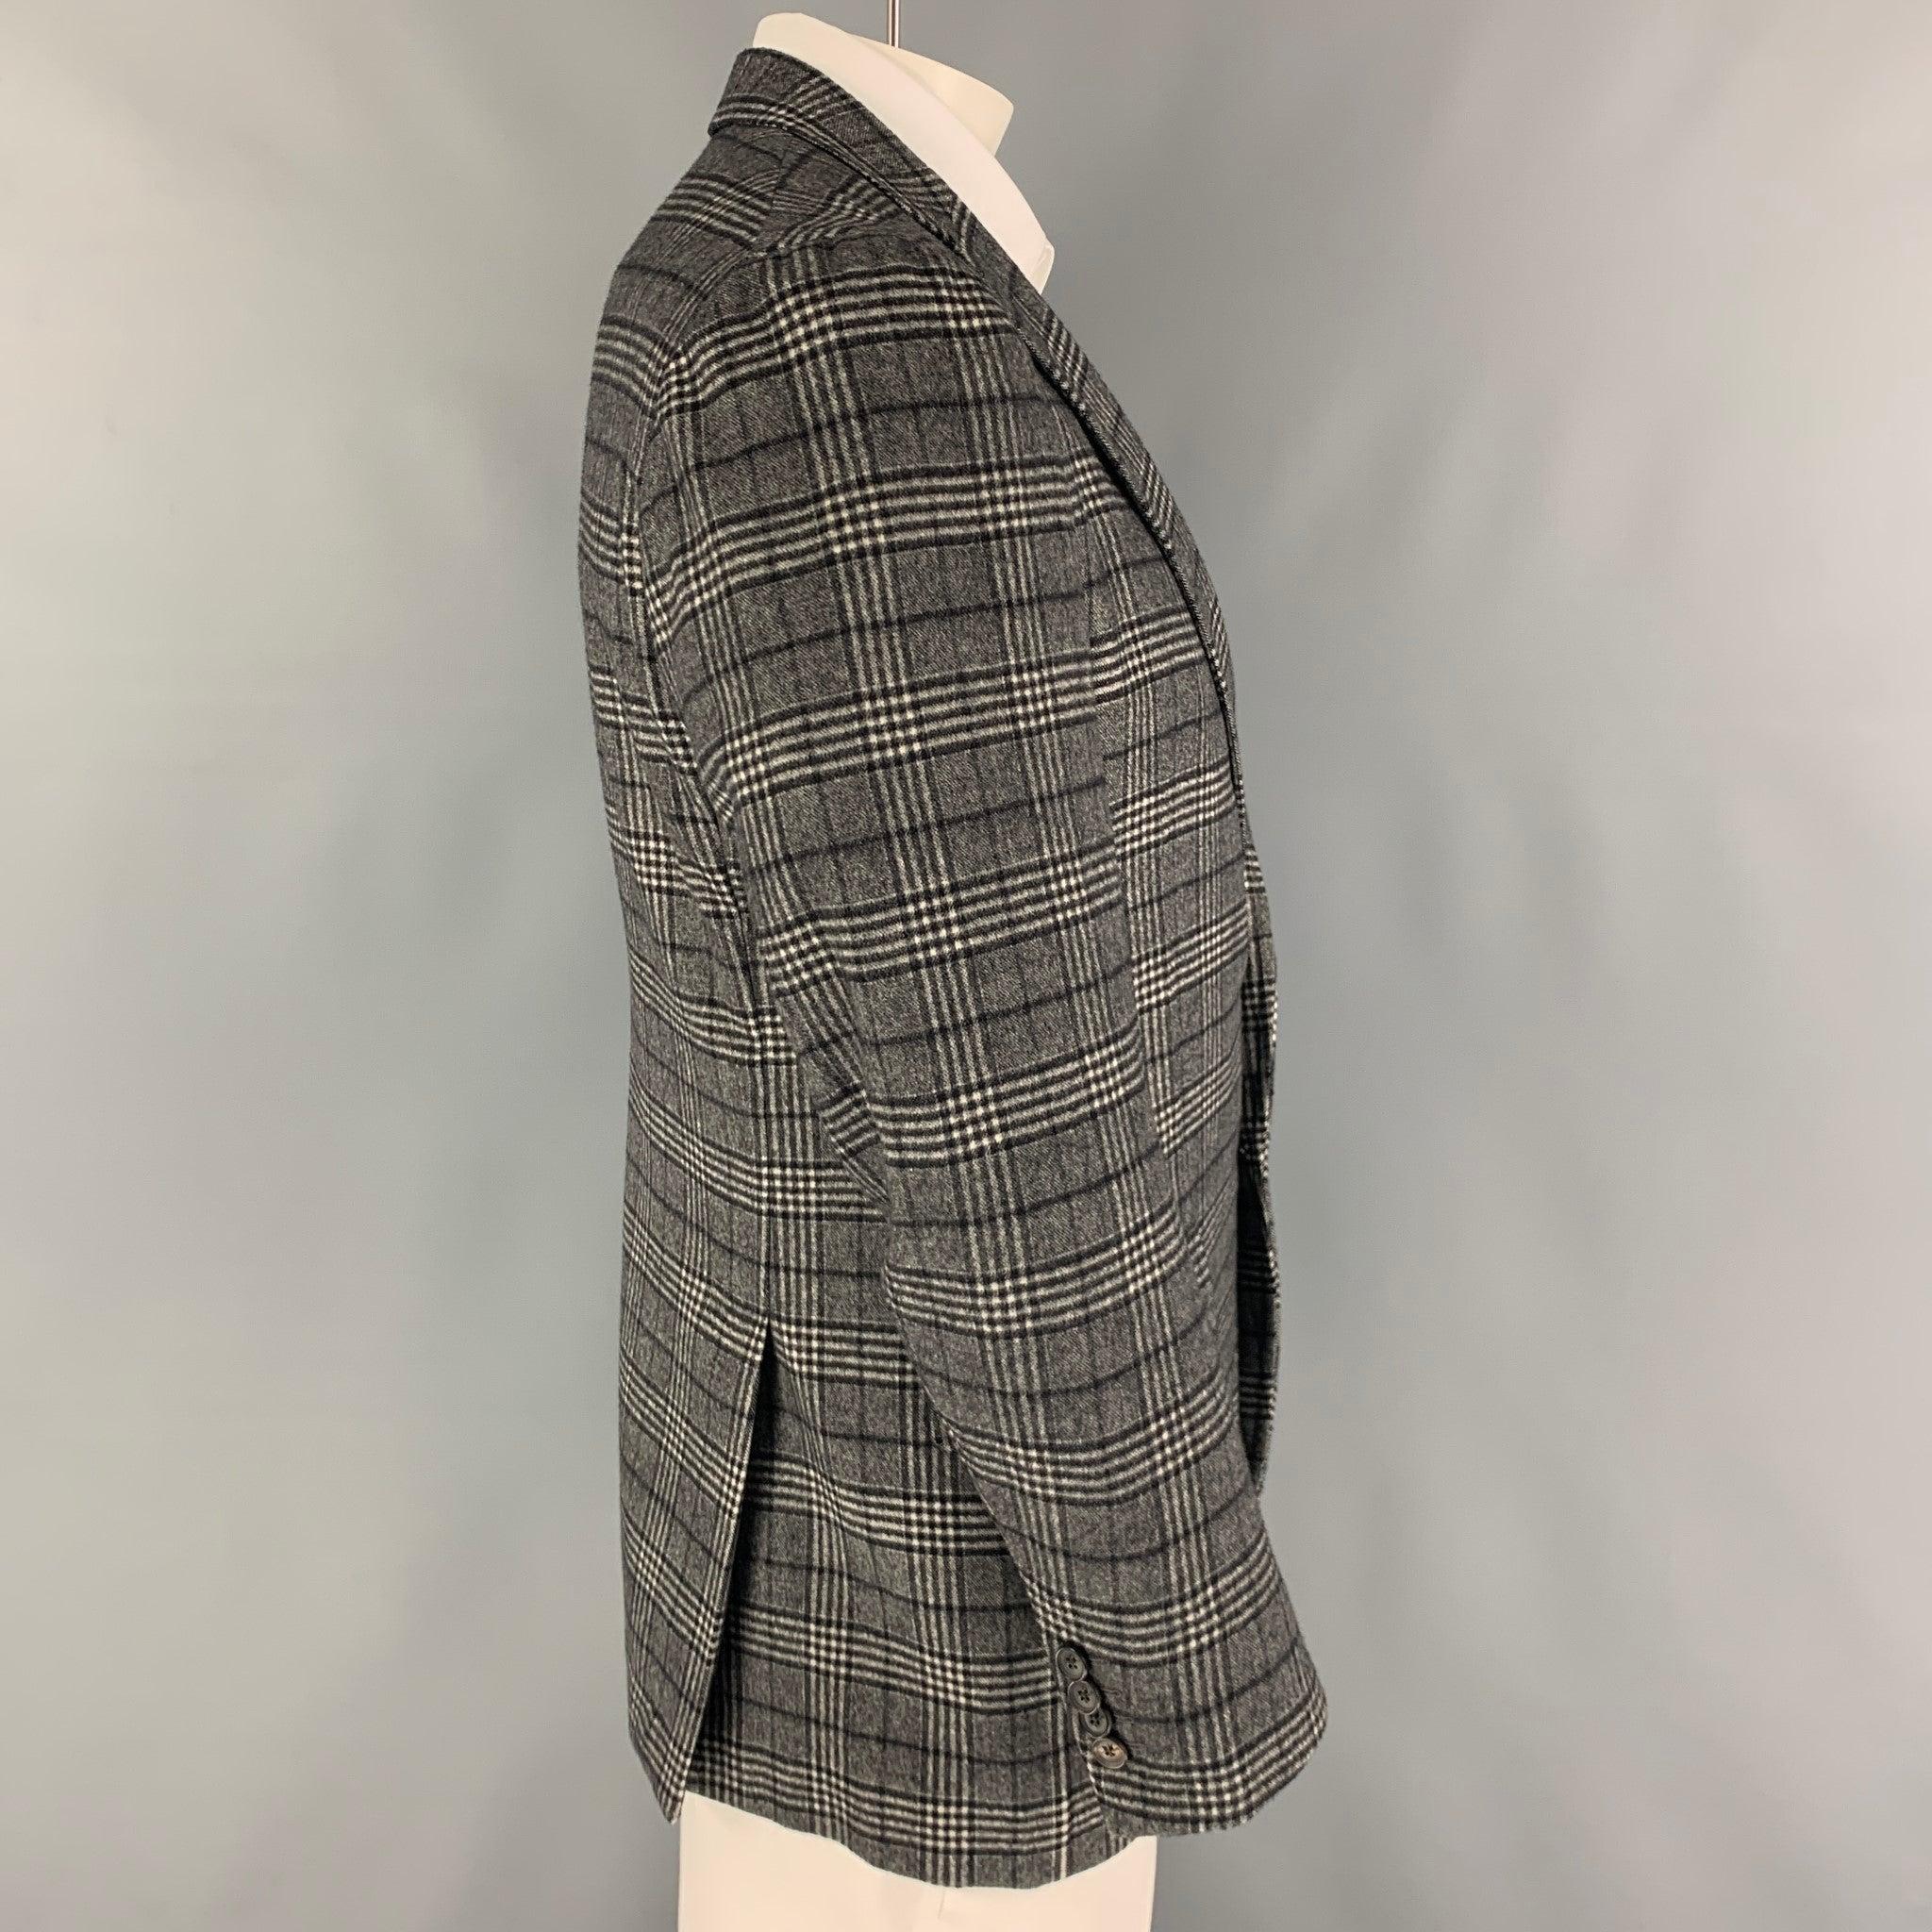 ISAIA sport coat comes in a black & white plaid wool with a half liner featuring a notch lapel, flap pockets, double back vent, and a double button closure.
Excellent
Pre-Owned Condition. 

Marked:   52 

Measurements: 
 
Shoulder: 17 inches Chest: